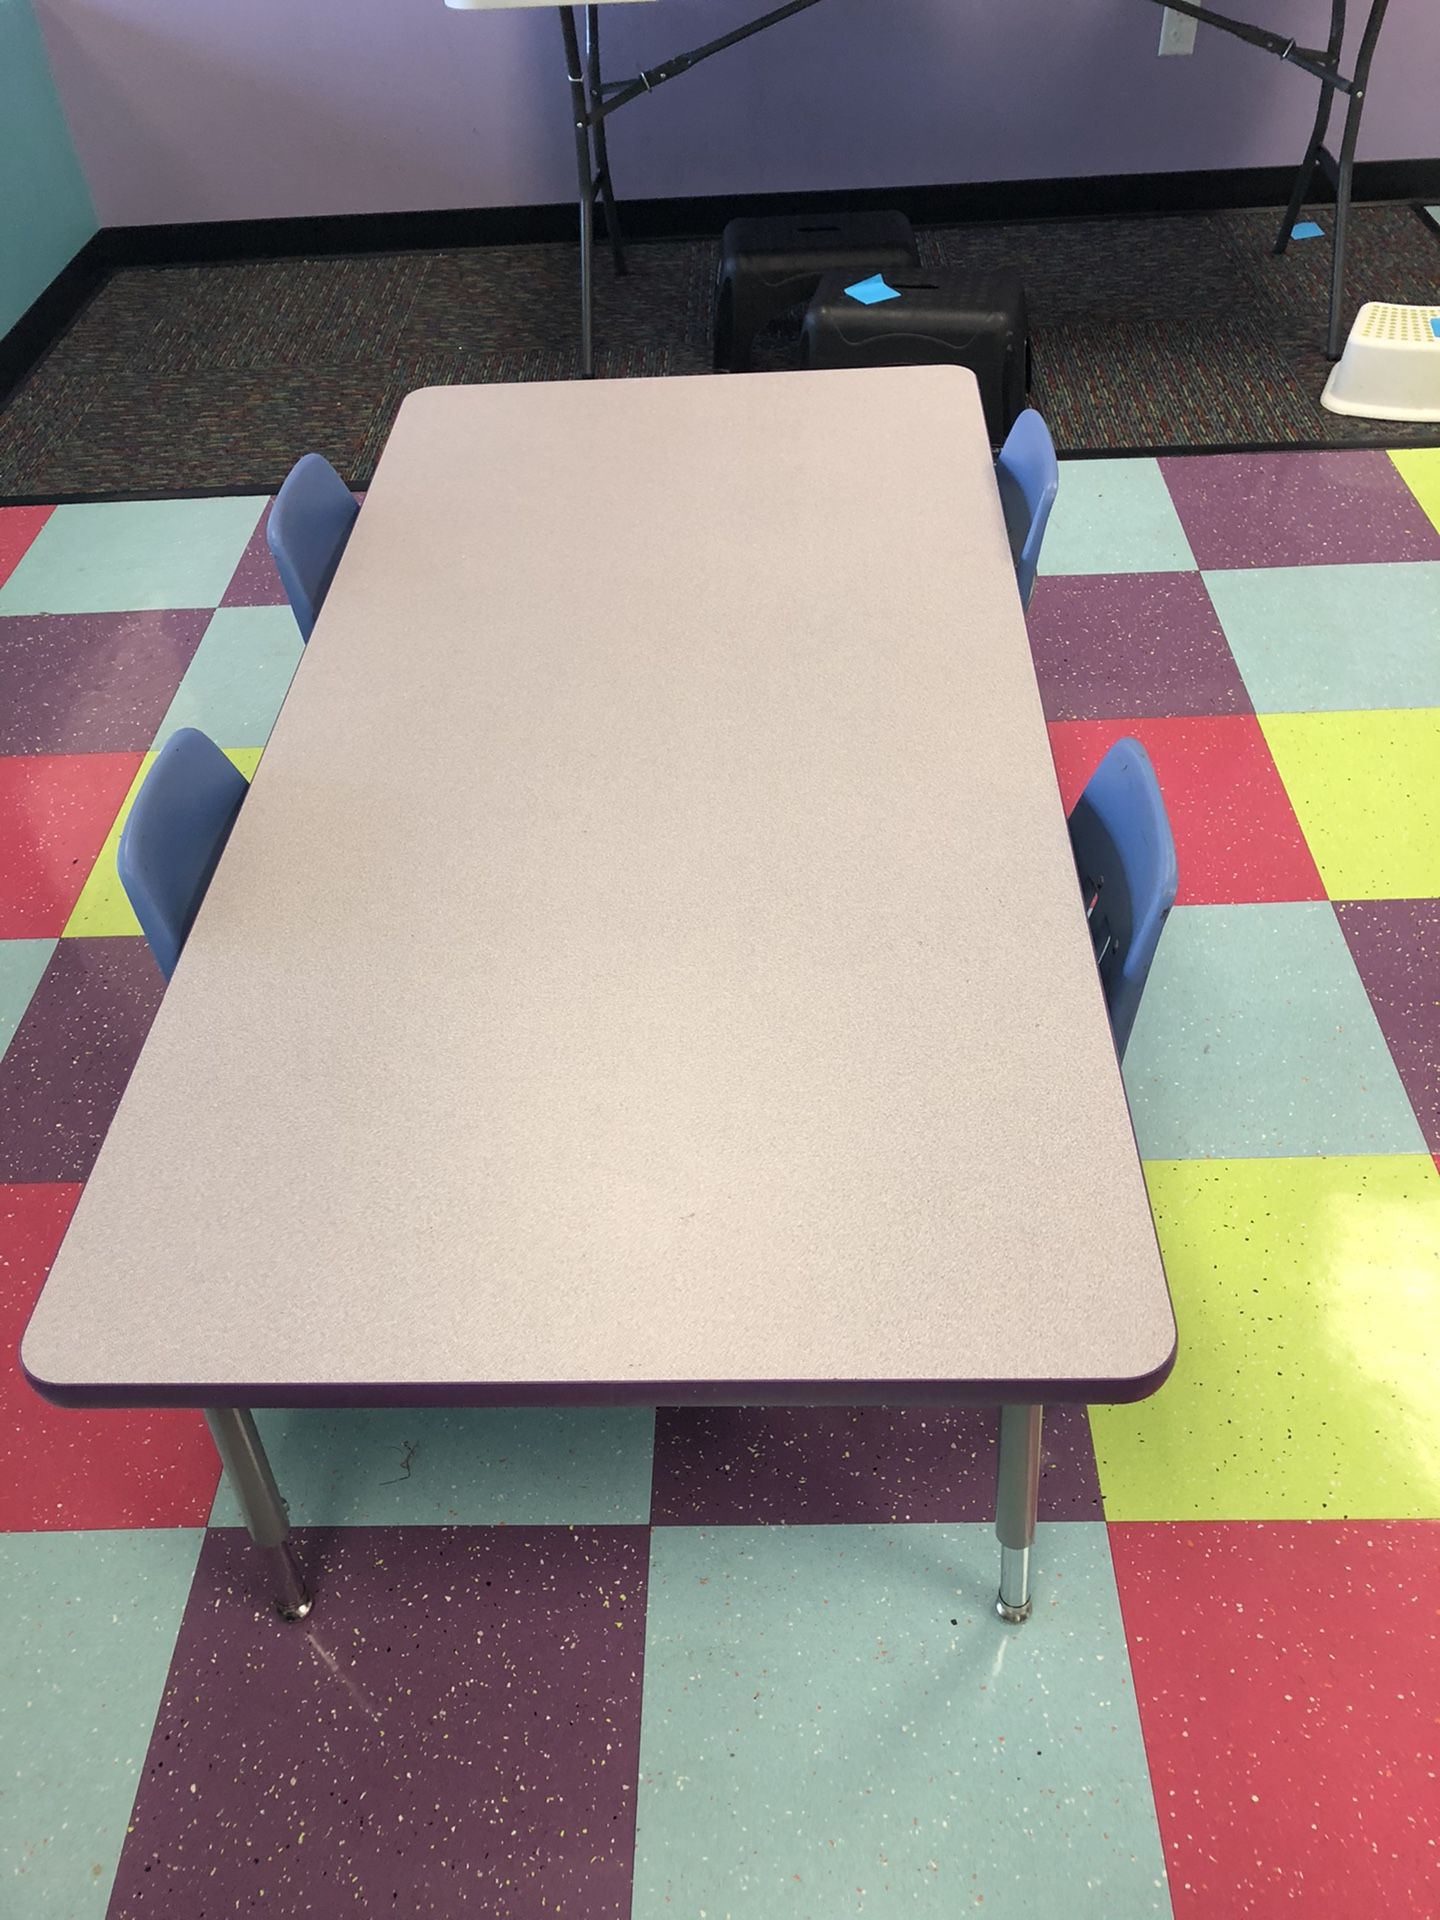 Kids/toddler sized table and chairs